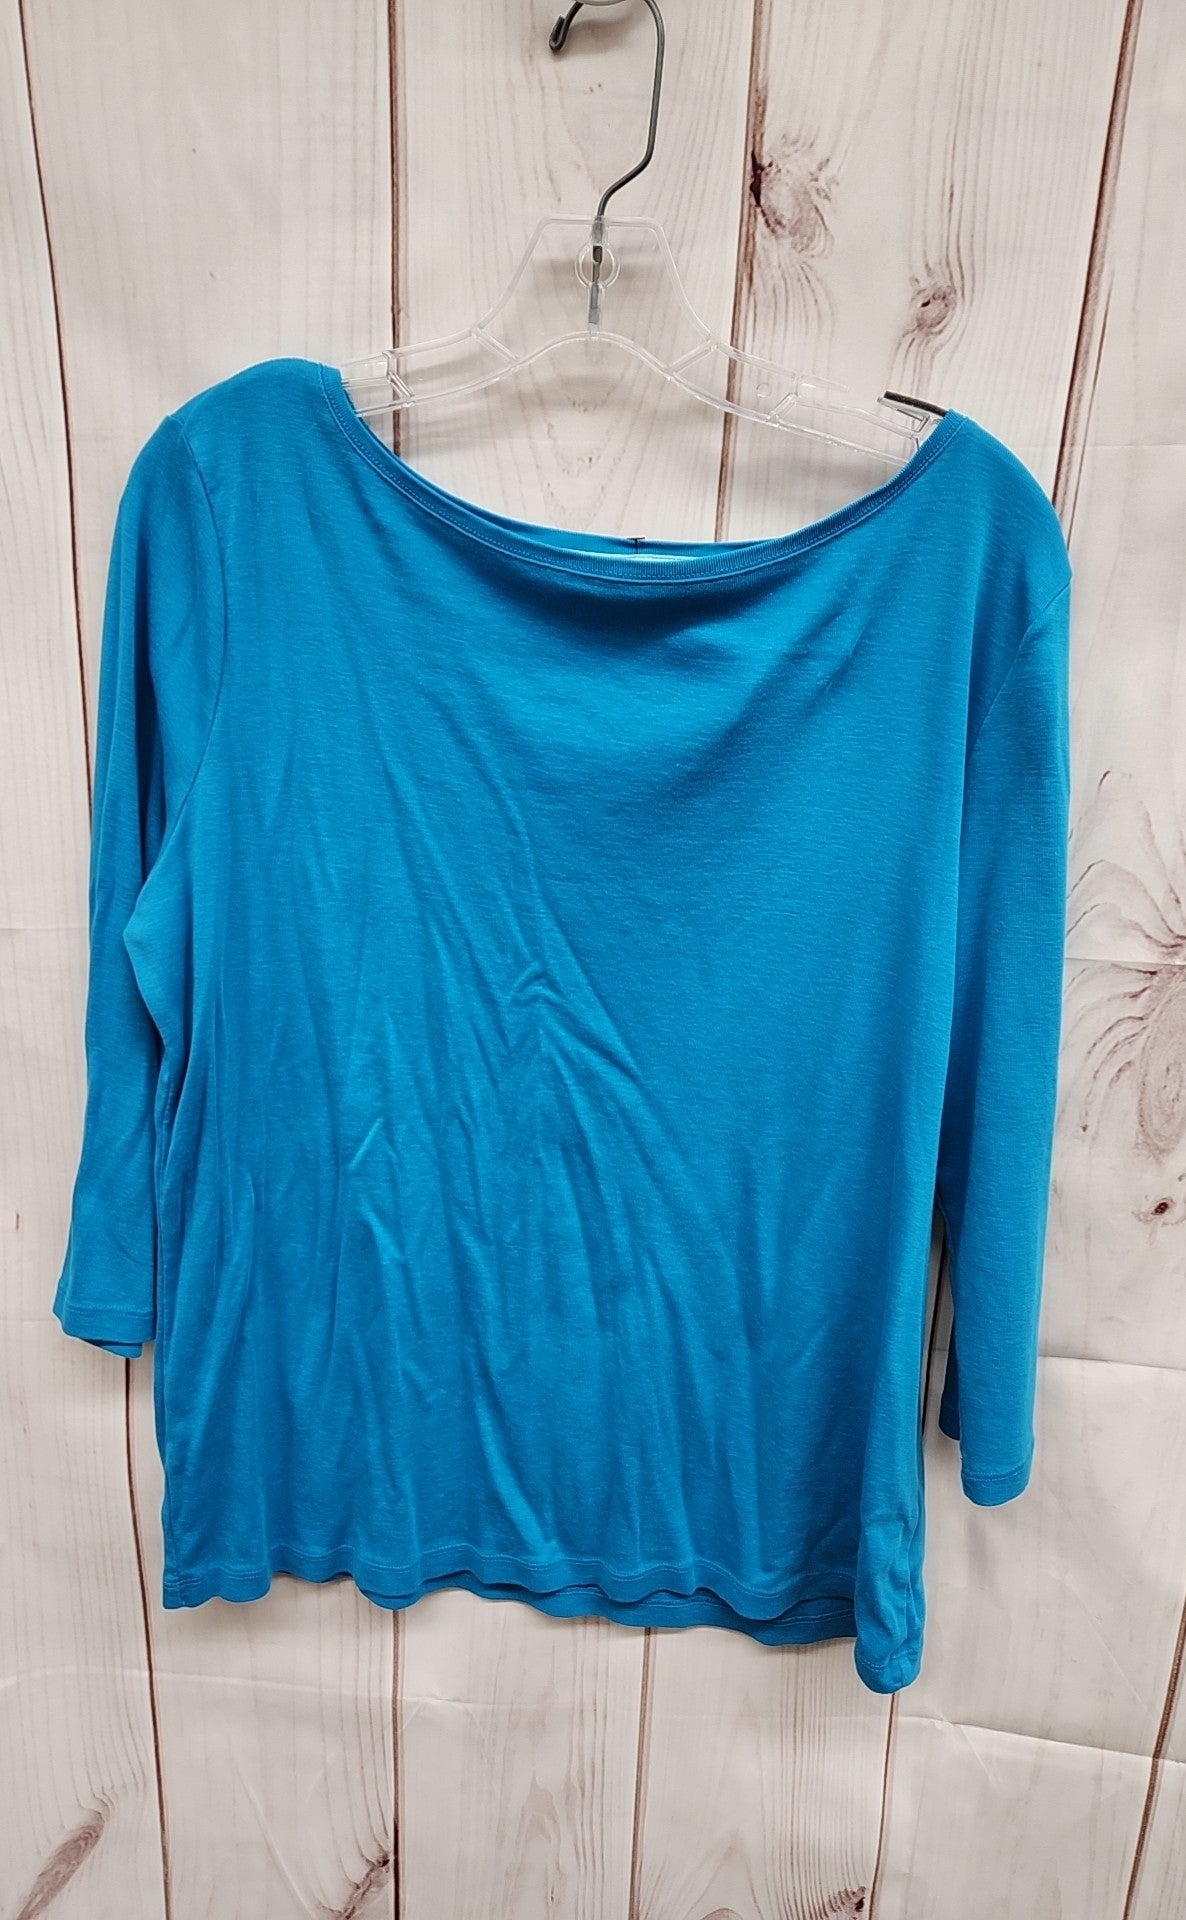 Talbots Women's Size 1X Turquoise 3/4 Sleeve Top